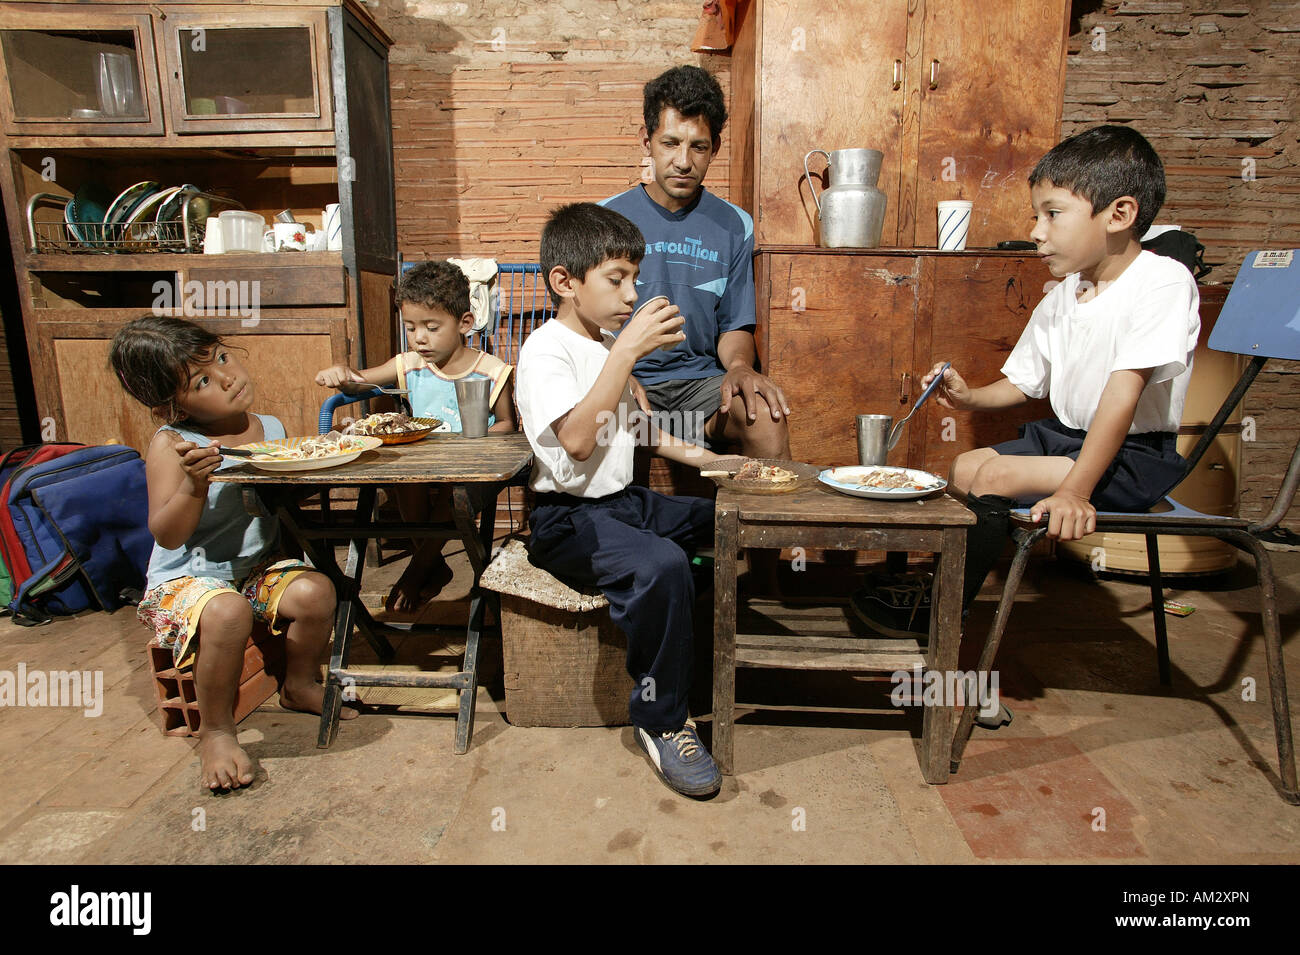 Guarani family eating, single father, in the poor area of Chacarita, Asuncion, Paraguay, South America Stock Photo